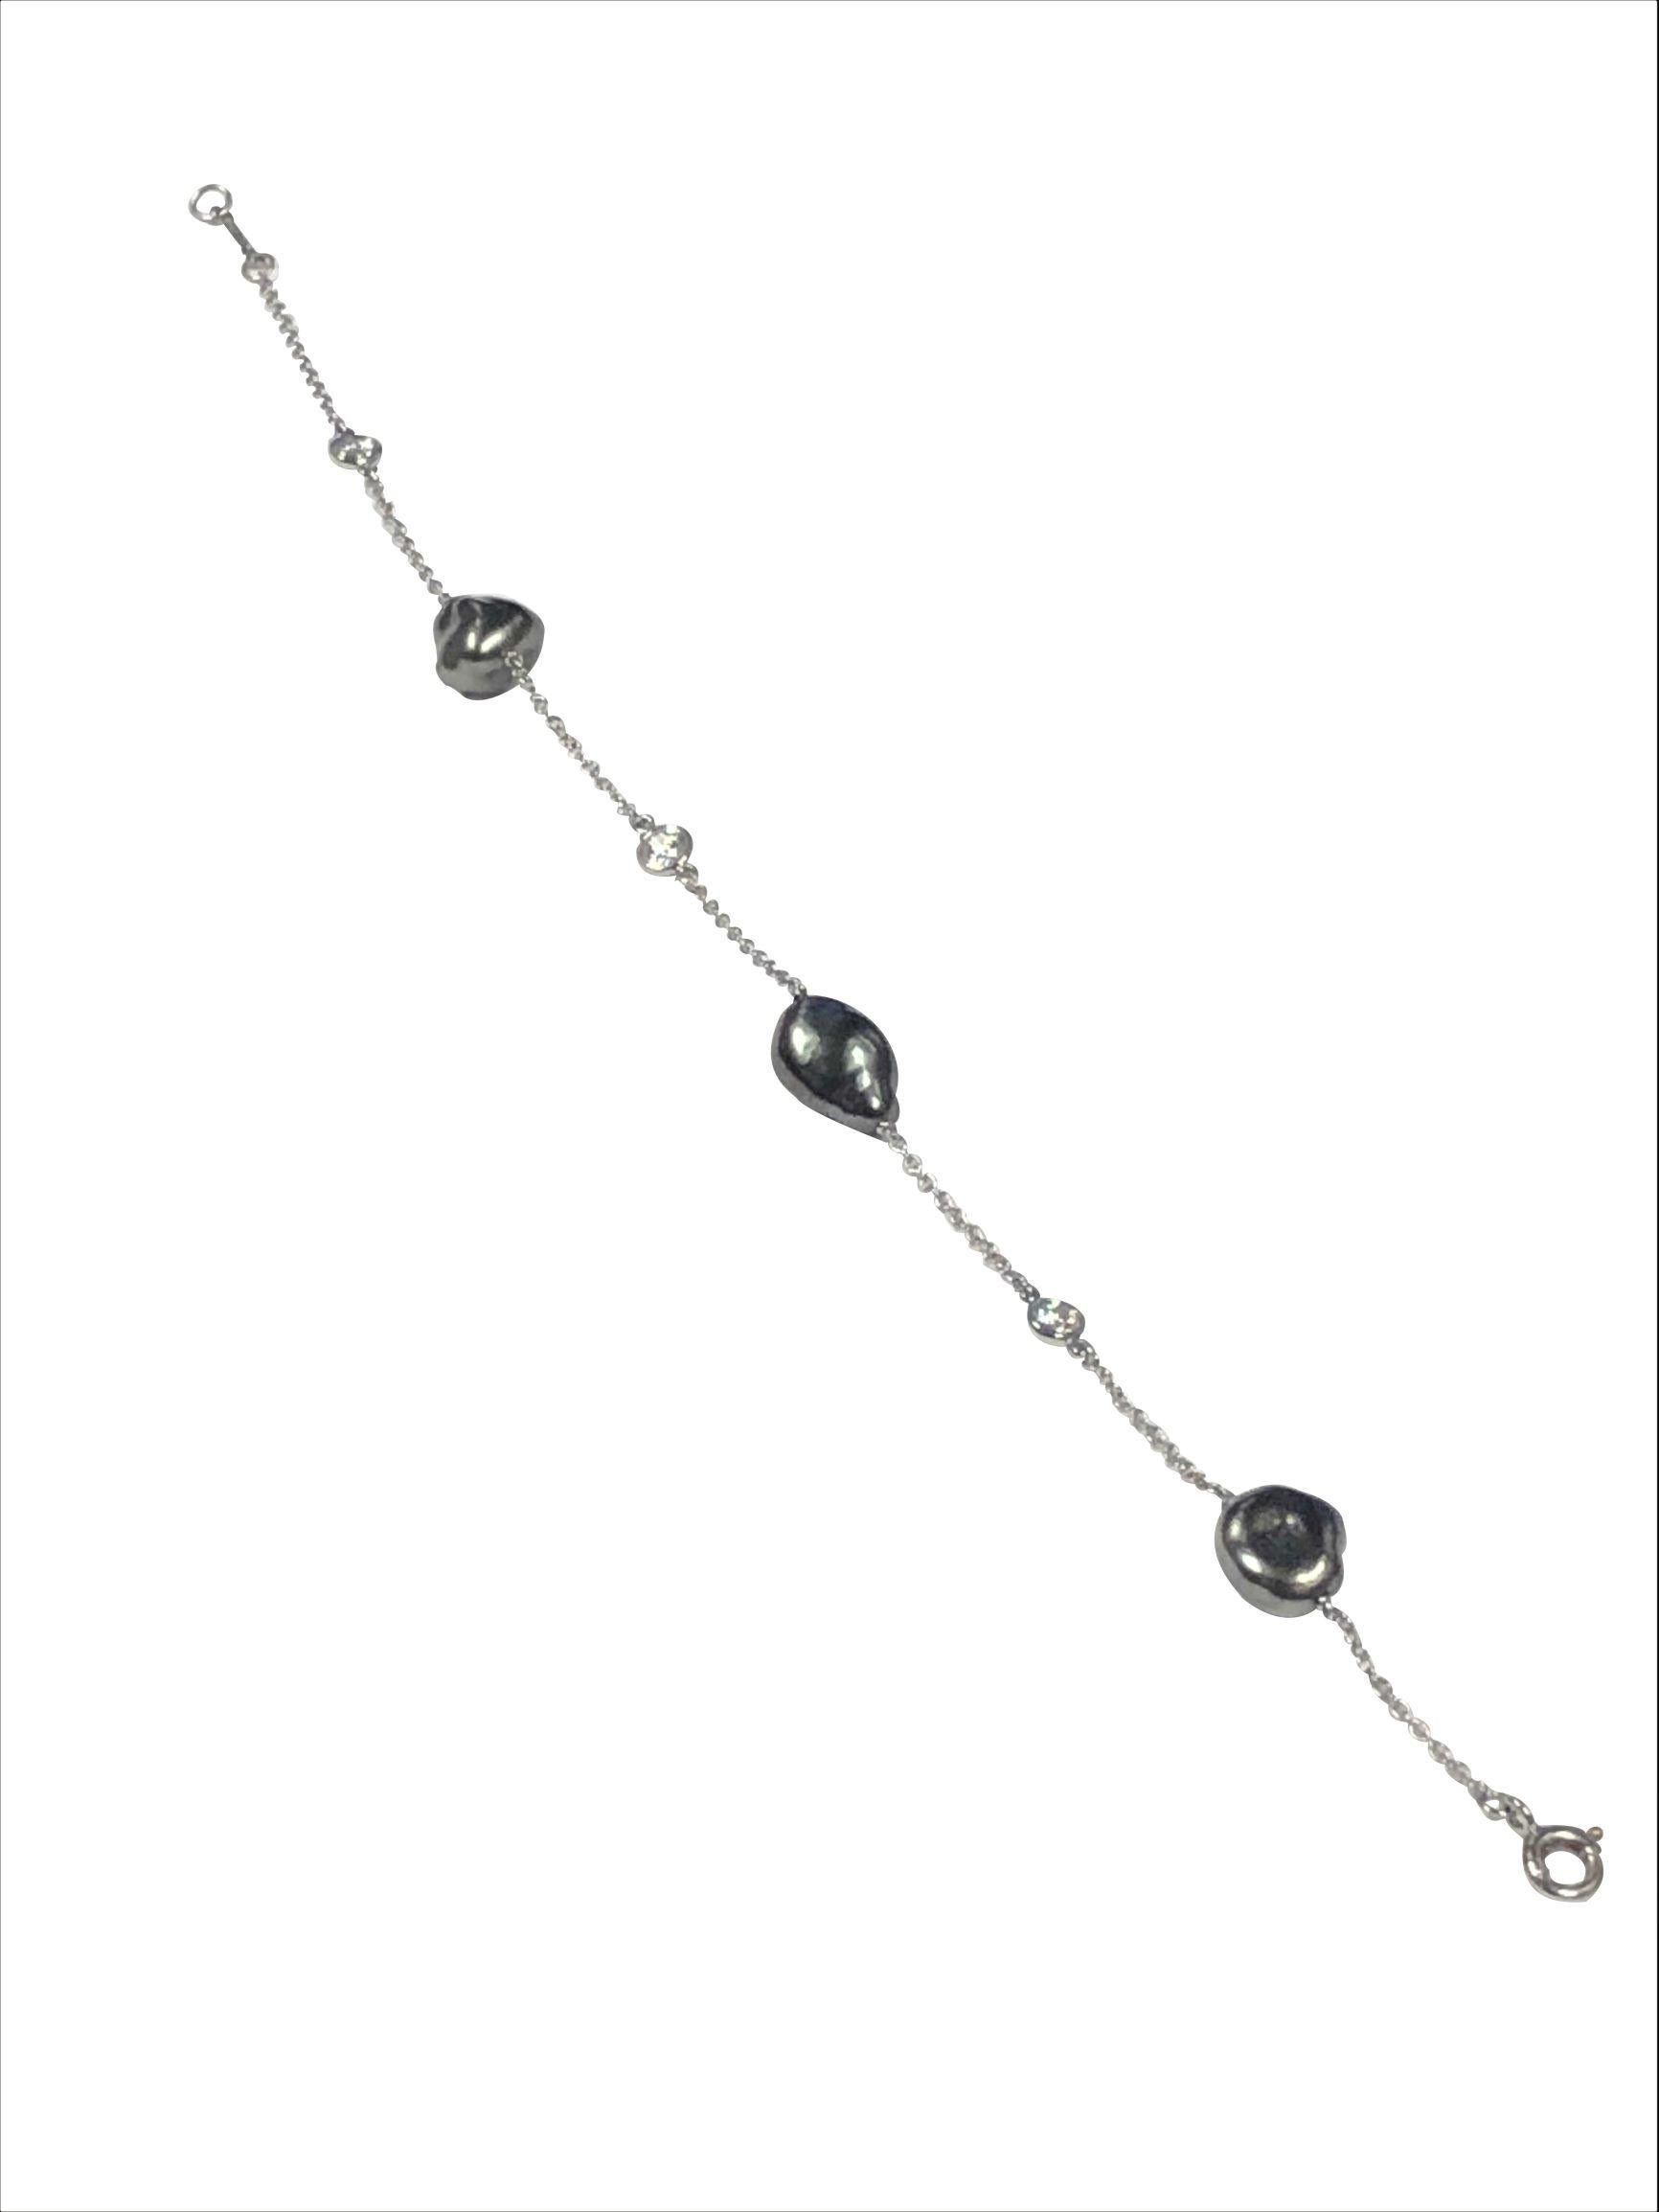 Circa 2010 Elsa Peretti for Tiffany & Company Sprinkle collection, Diamonds by the Yard Platinum, Pearl and Diamond Bracelet. measuring 7 inches in length and set with 3 Tahitian Black Pearls each measuring between 5 to 9 M.M. and further set with